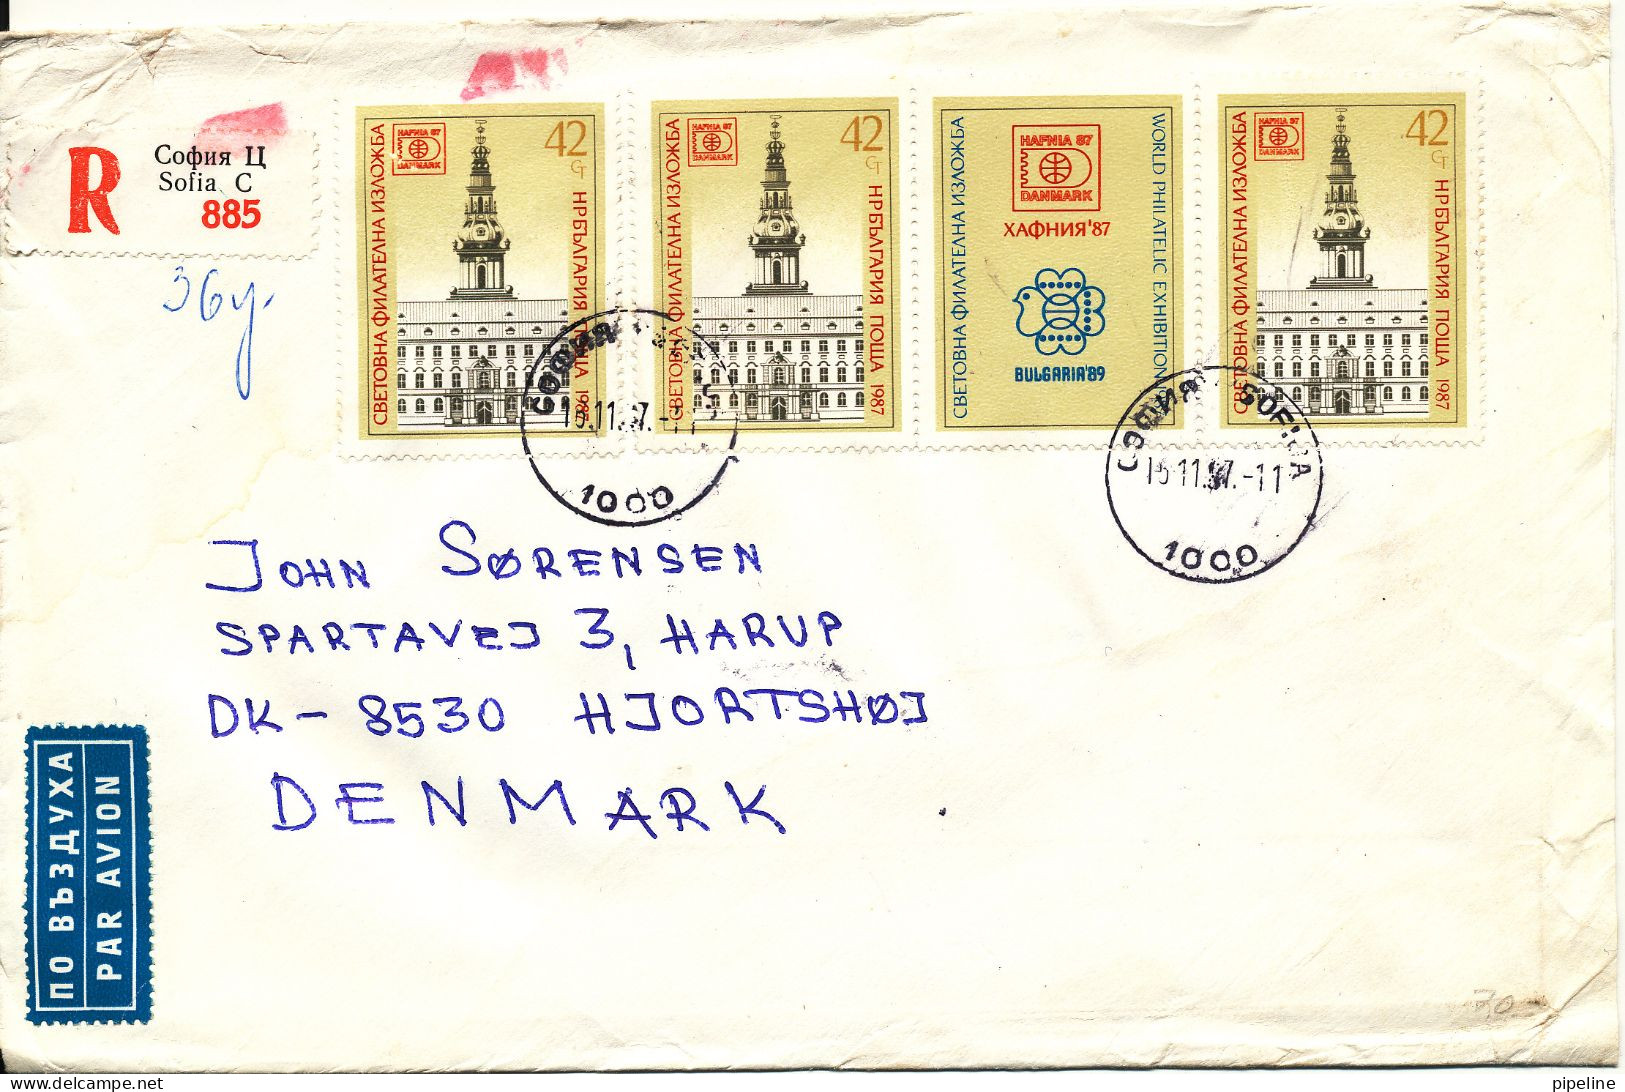 Bulgaria Registered Cover Sent To Denmark Sofia 15-11-1987 With Hafnia 87 In Denmark Stamps (cover Damaged On Backside) - Covers & Documents